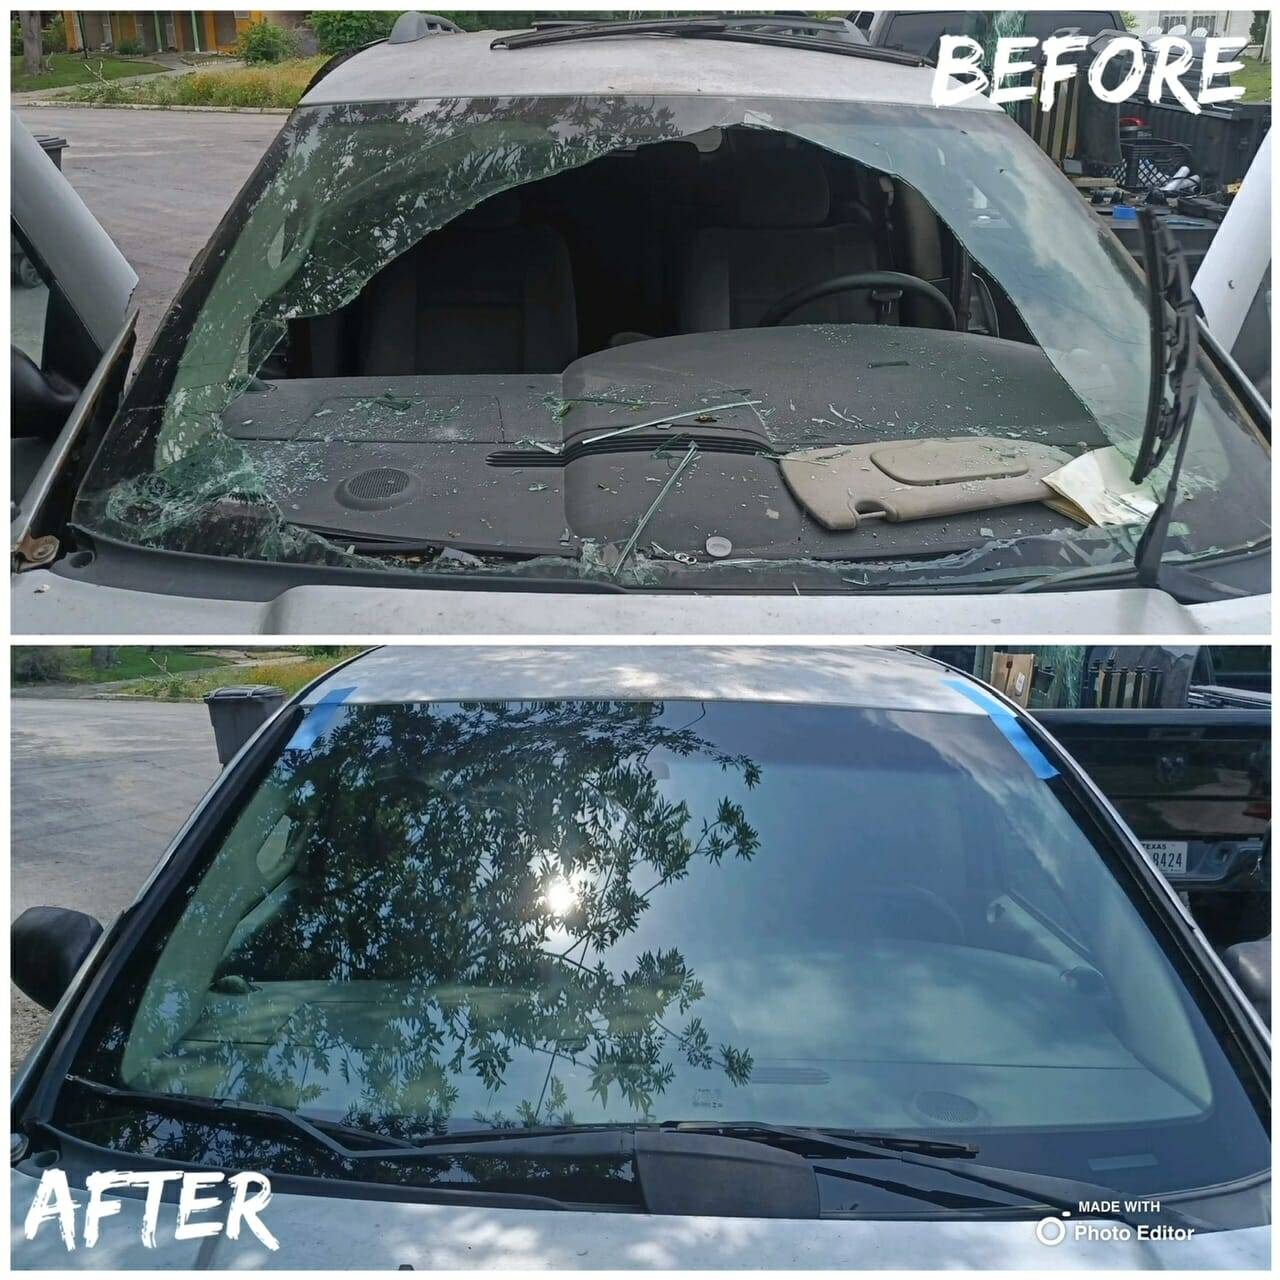 This before and after image demonstrates the successful repair of a car's front windshield in Elmendorf, Texas. The top half shows the windshield with severe damage, as the entire center is caved in due to vandalism. The bottom half displays the car after the repair, fitted with a new, clear, and intact front windshield, emphasizing the quality of our windshield replacement service.